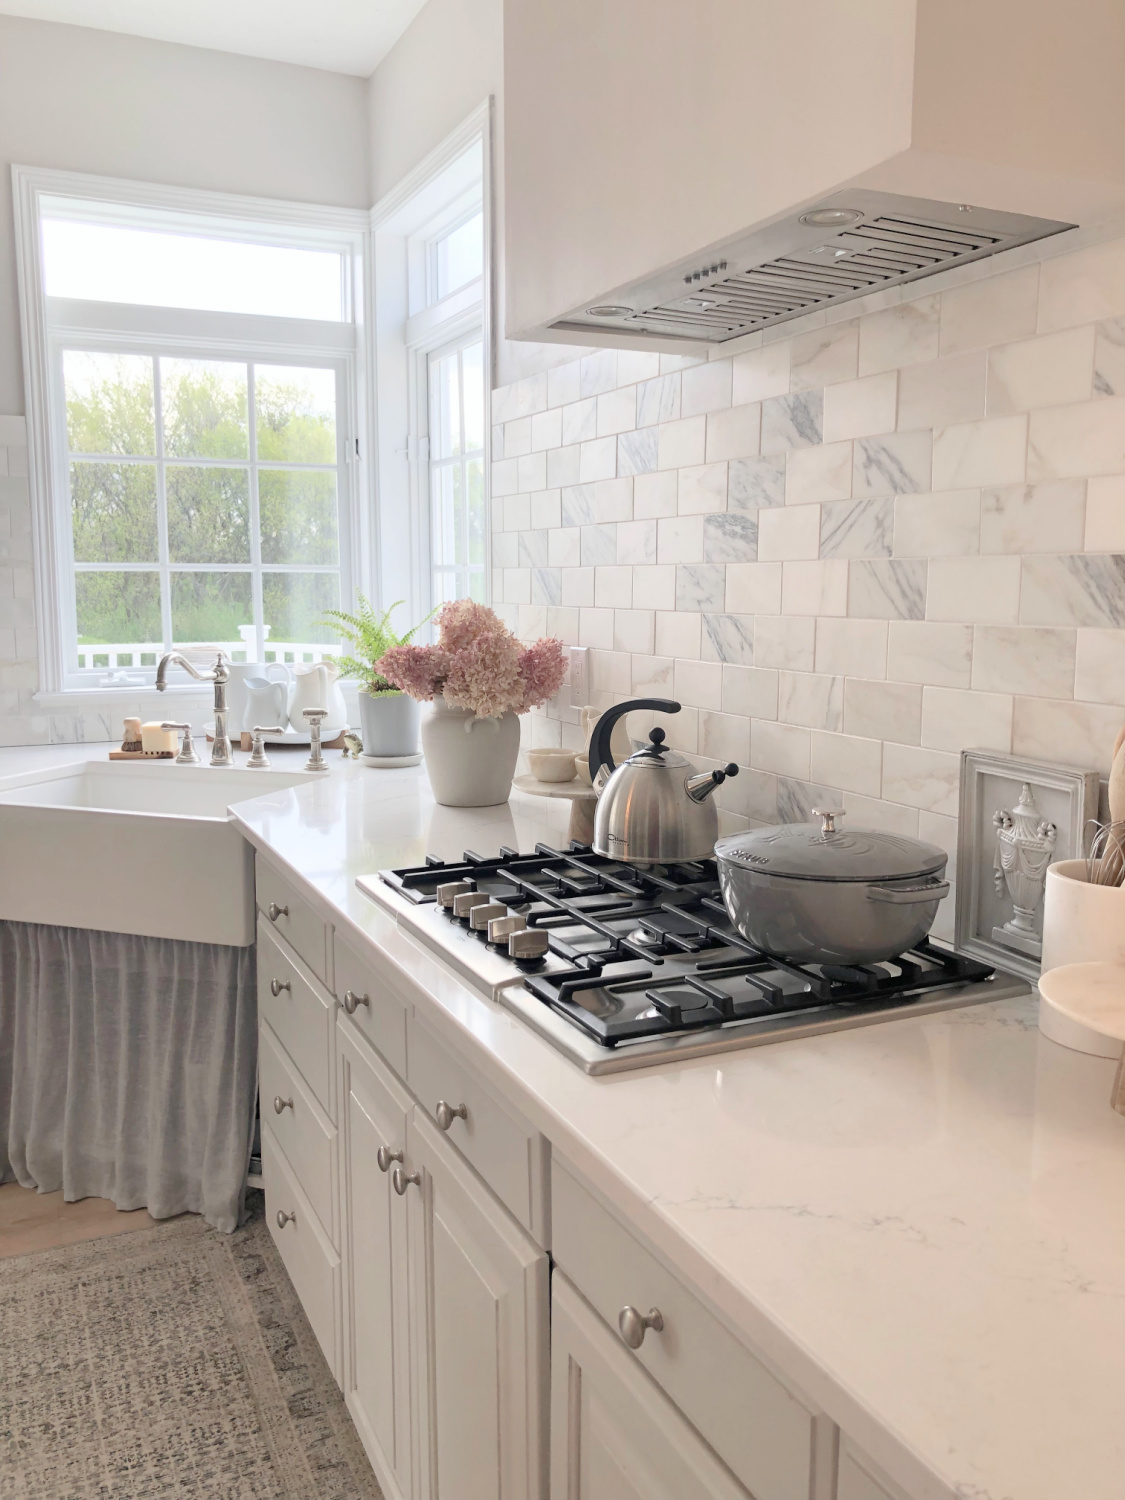 Hello Lovely's light grey and white modern French kitchen with Muse quartz, farm sink, Calacatta marble backsplash and Staub French oven.